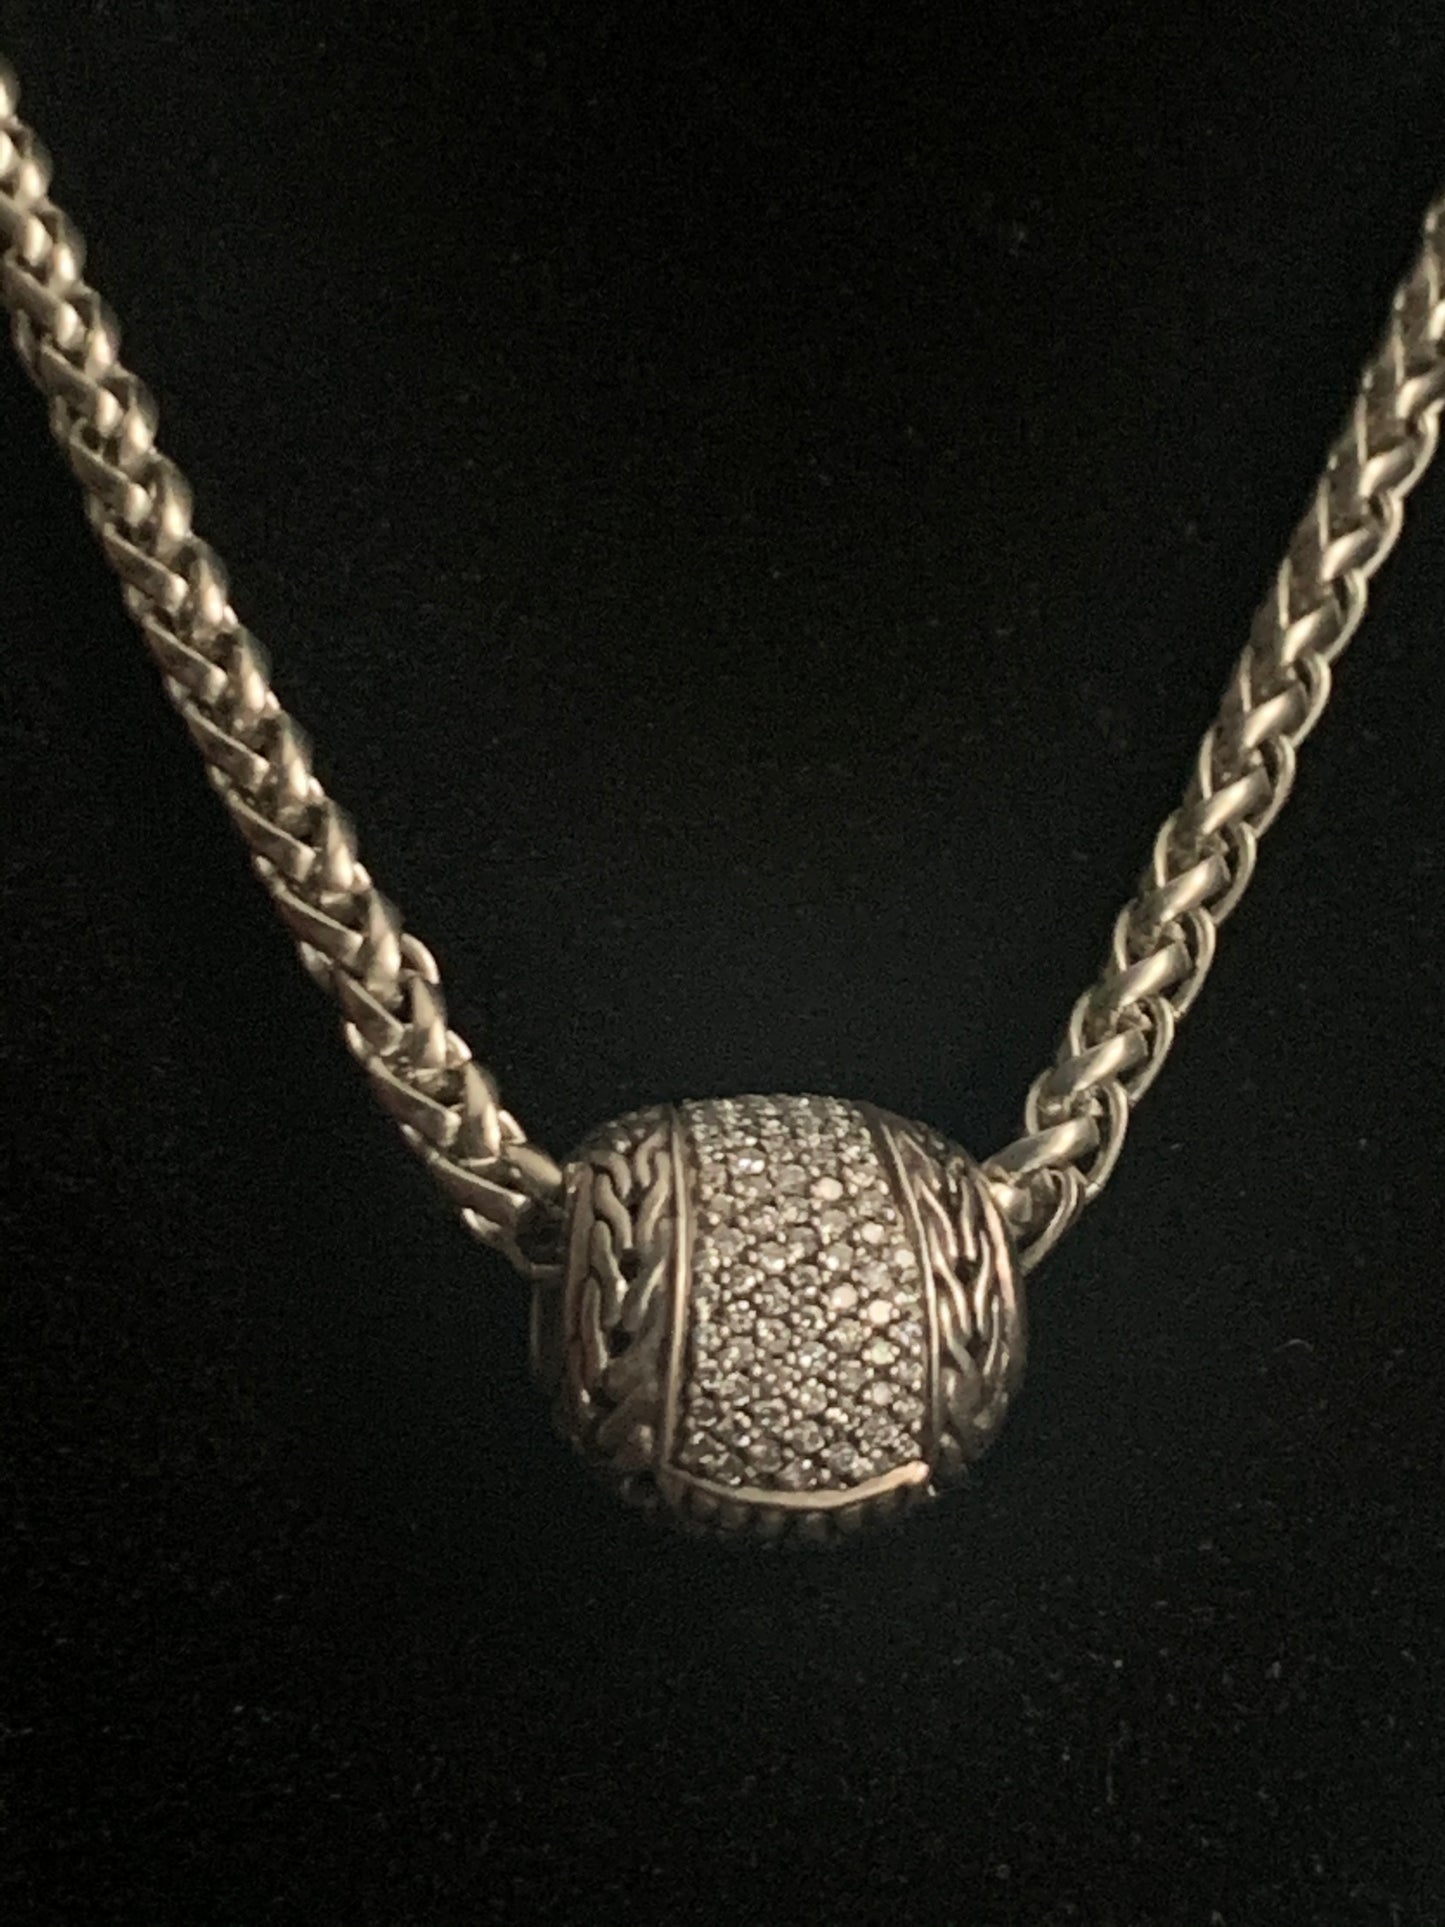 A silver chain with diamond pave pendant